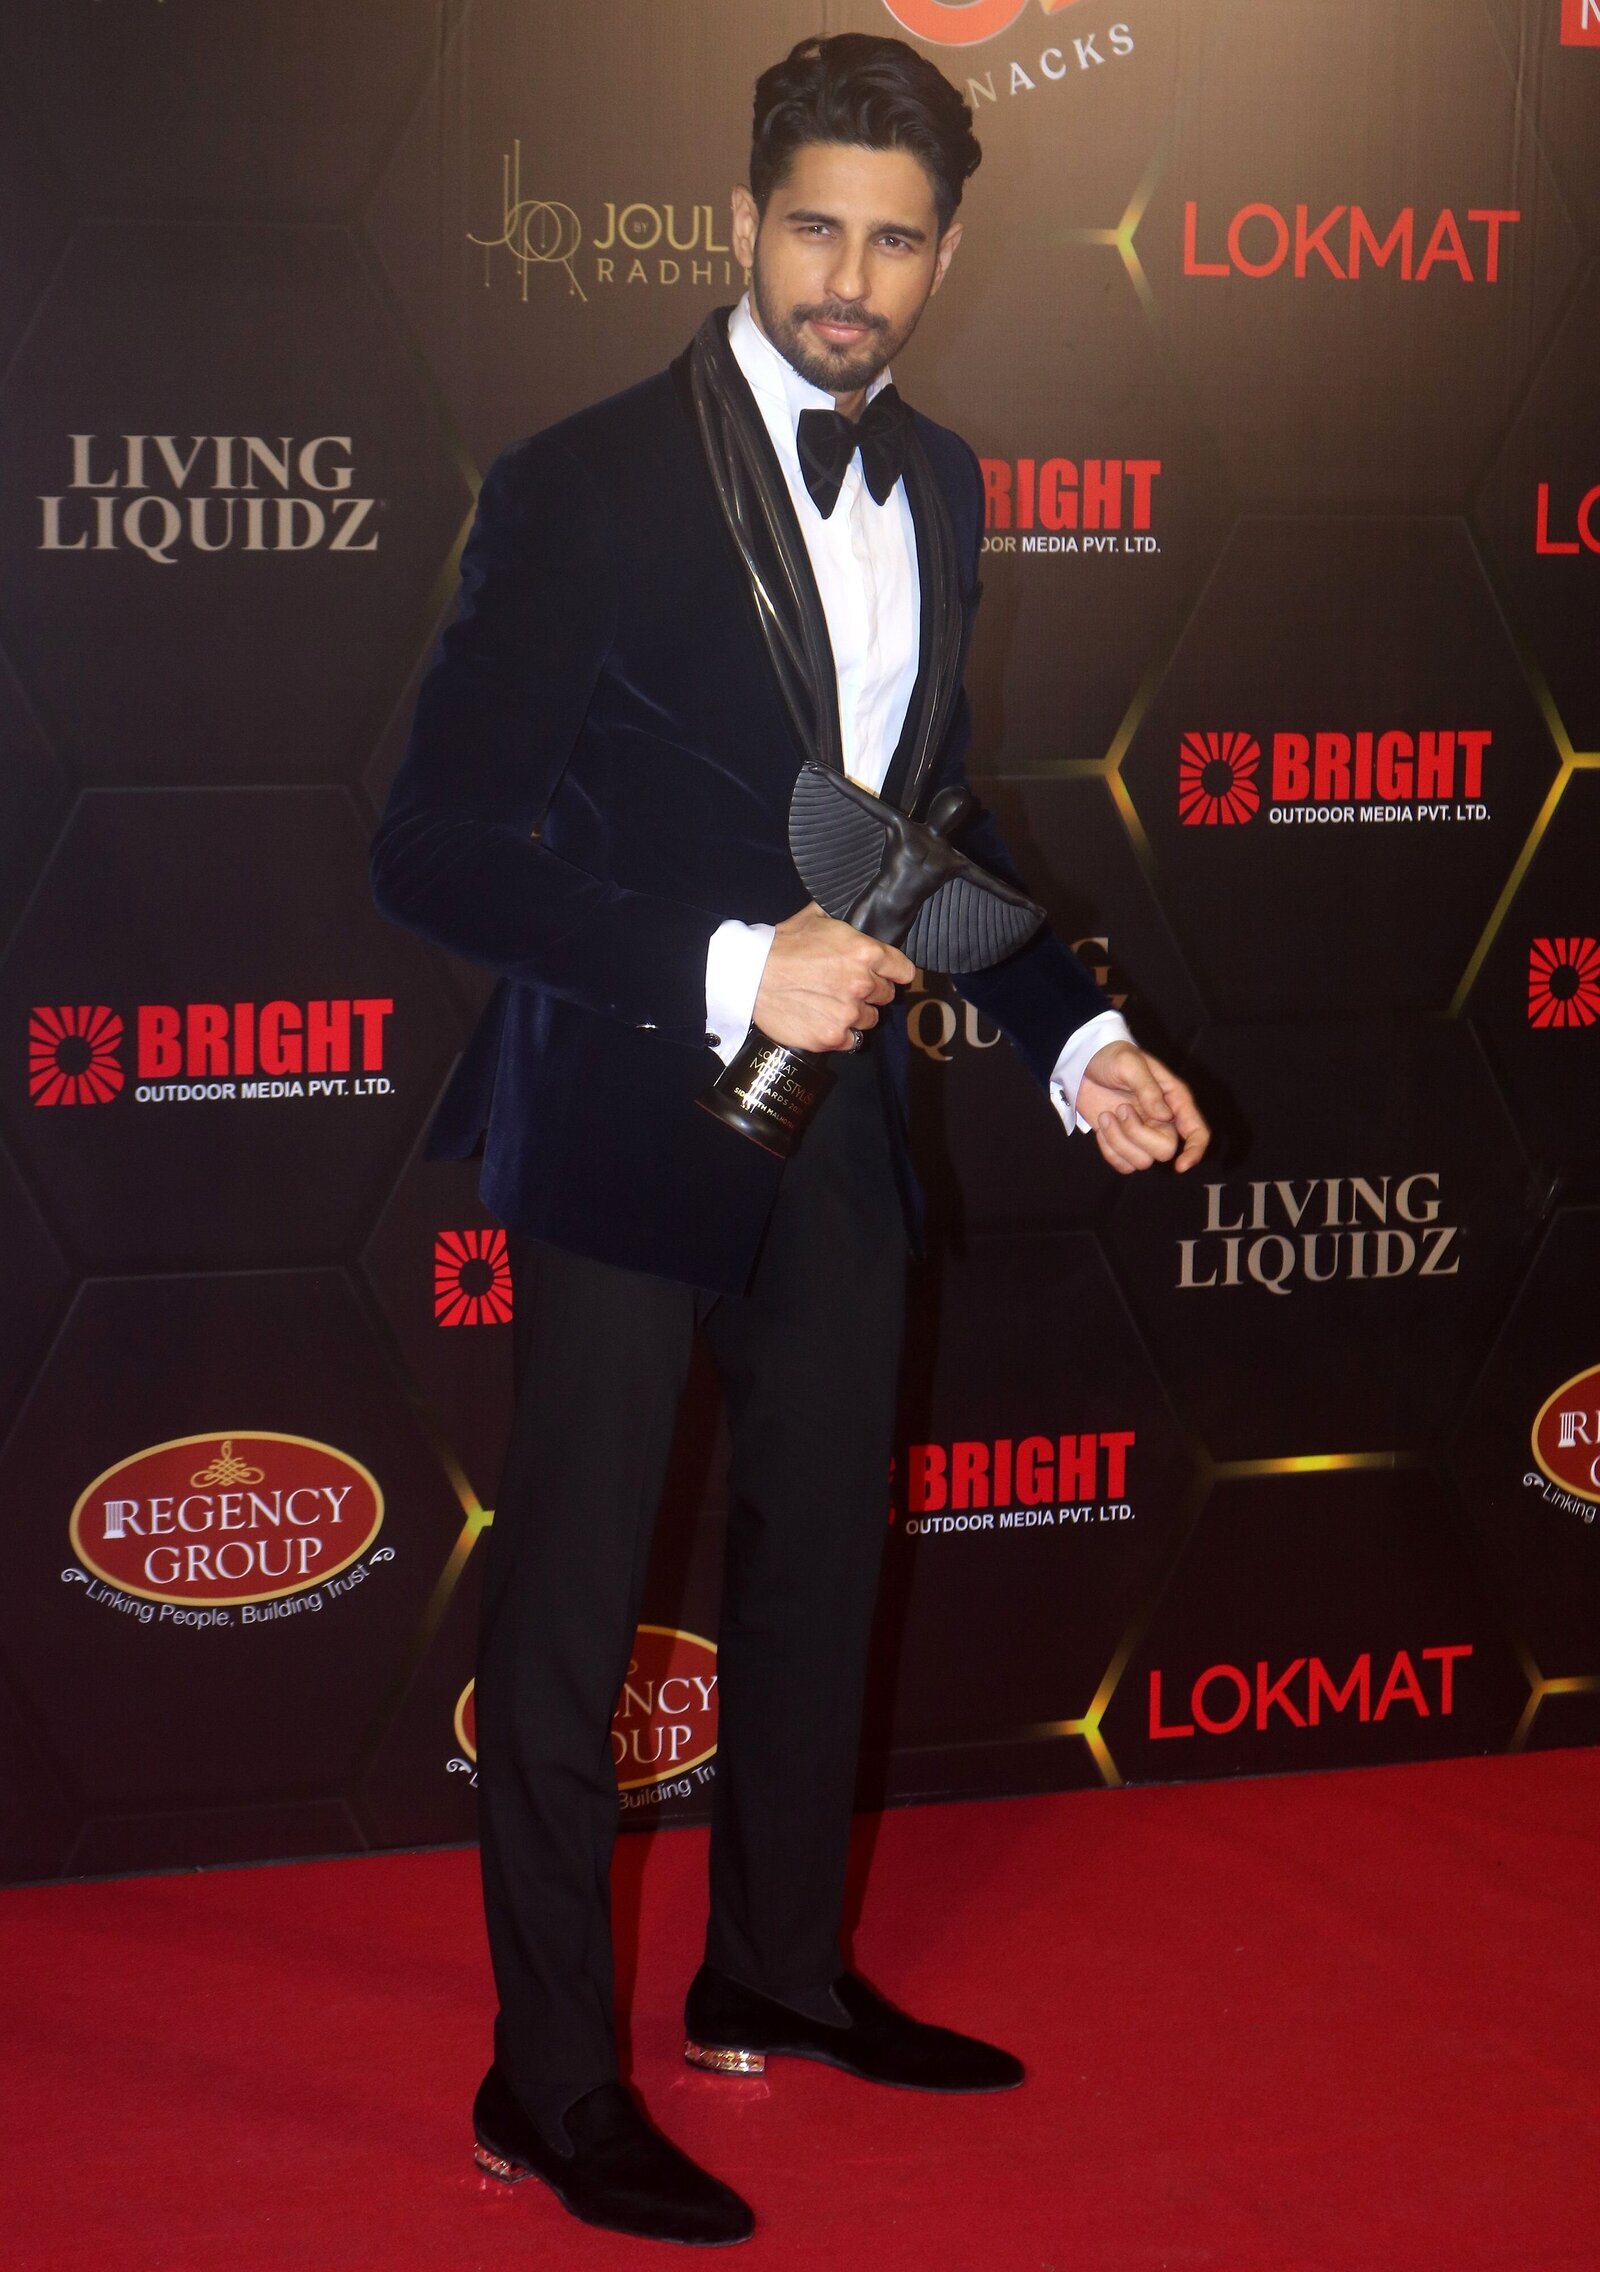 Sidharth Malhotra - Photos: Celebs At The Lokmat Most Stylish Awards 2021 | Picture 1845717